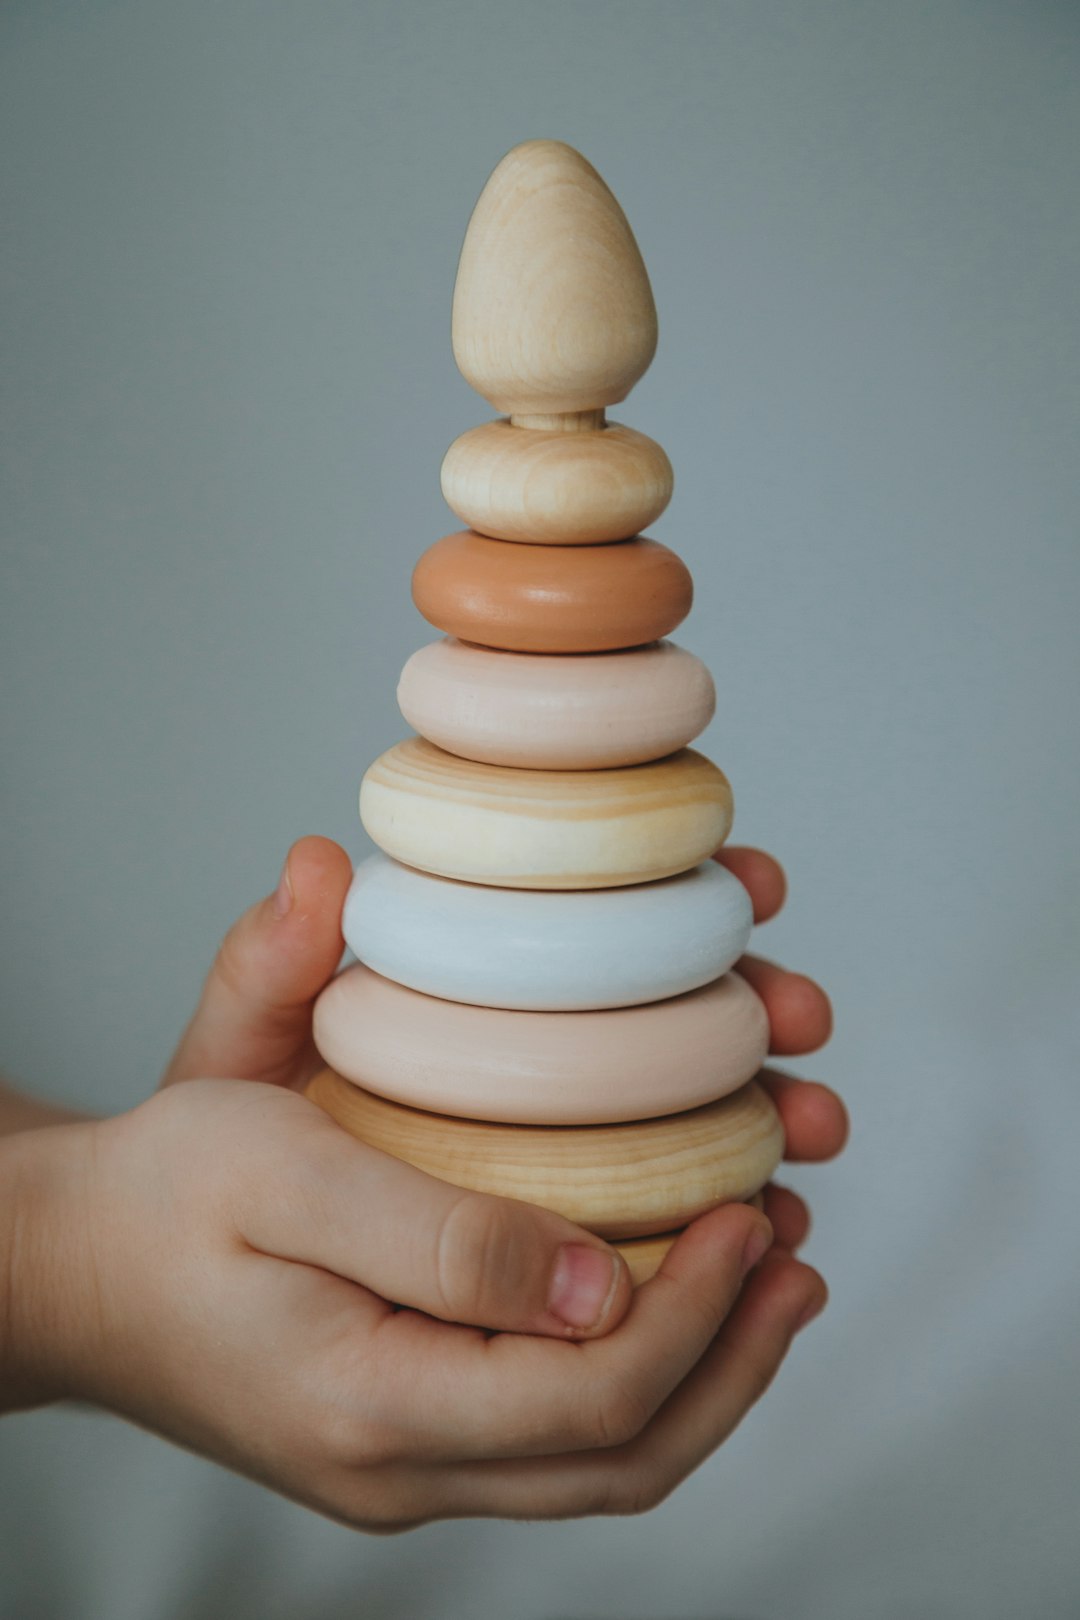 person holding white and brown wooden chess piece